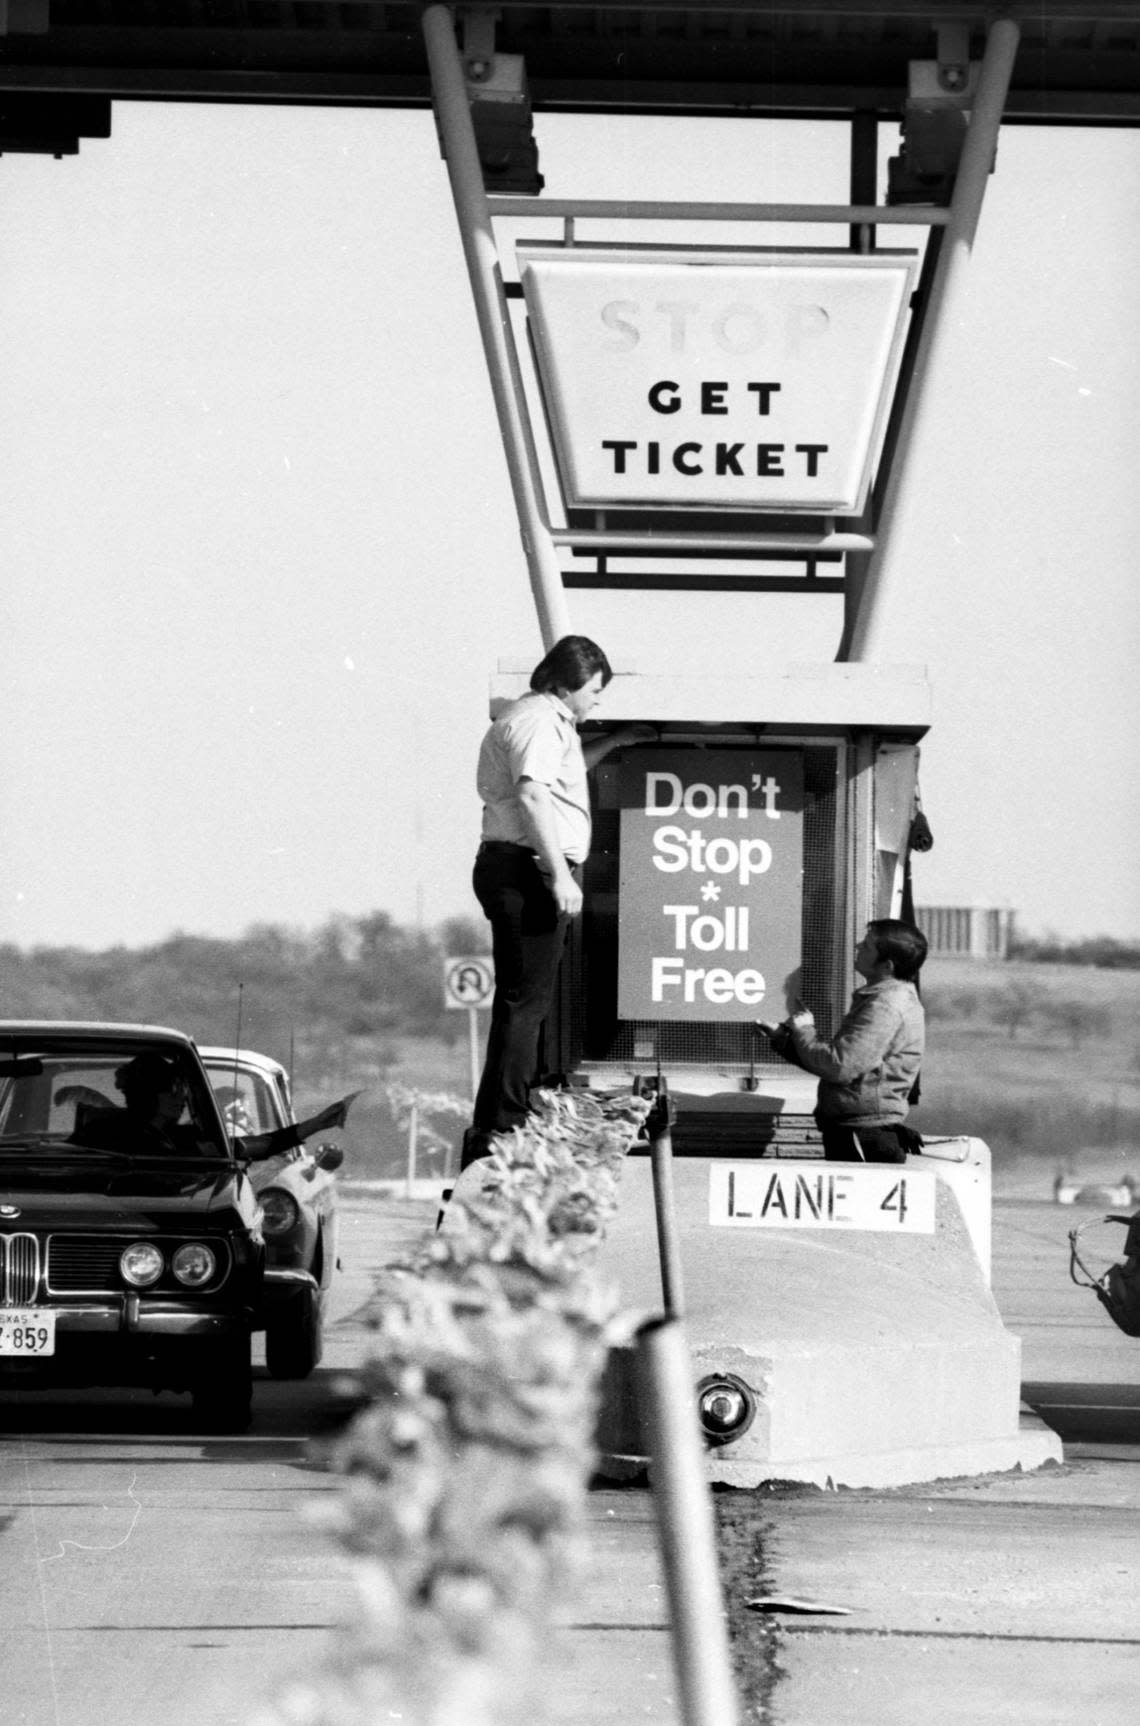 Dec. 27, 1977: Toll plazas were to be dismantled as drivers on the Dallas-Fort Worth Turnpike no longer had to pay.